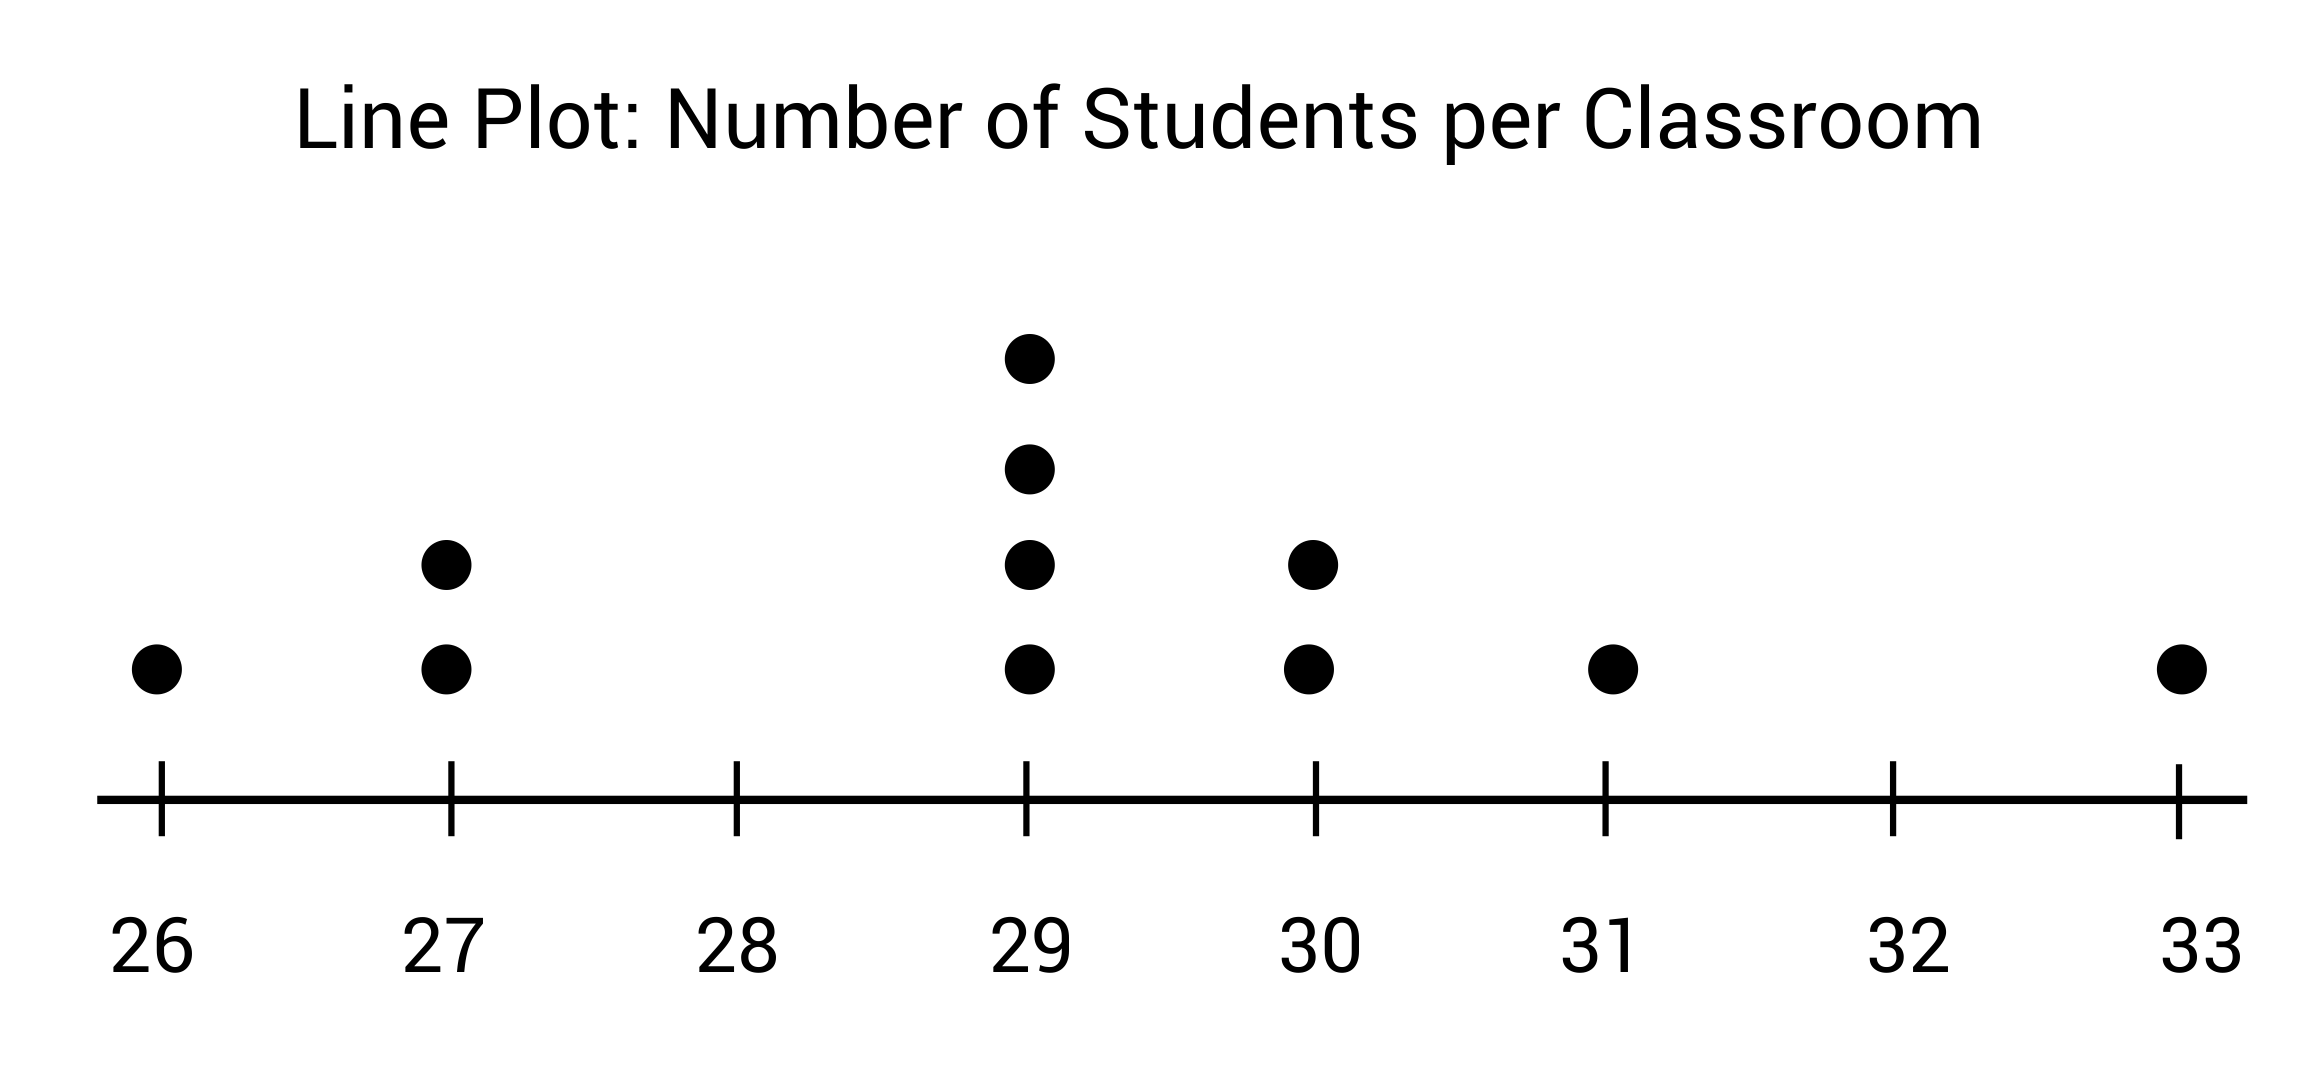 Line plot of the number of students per classroom